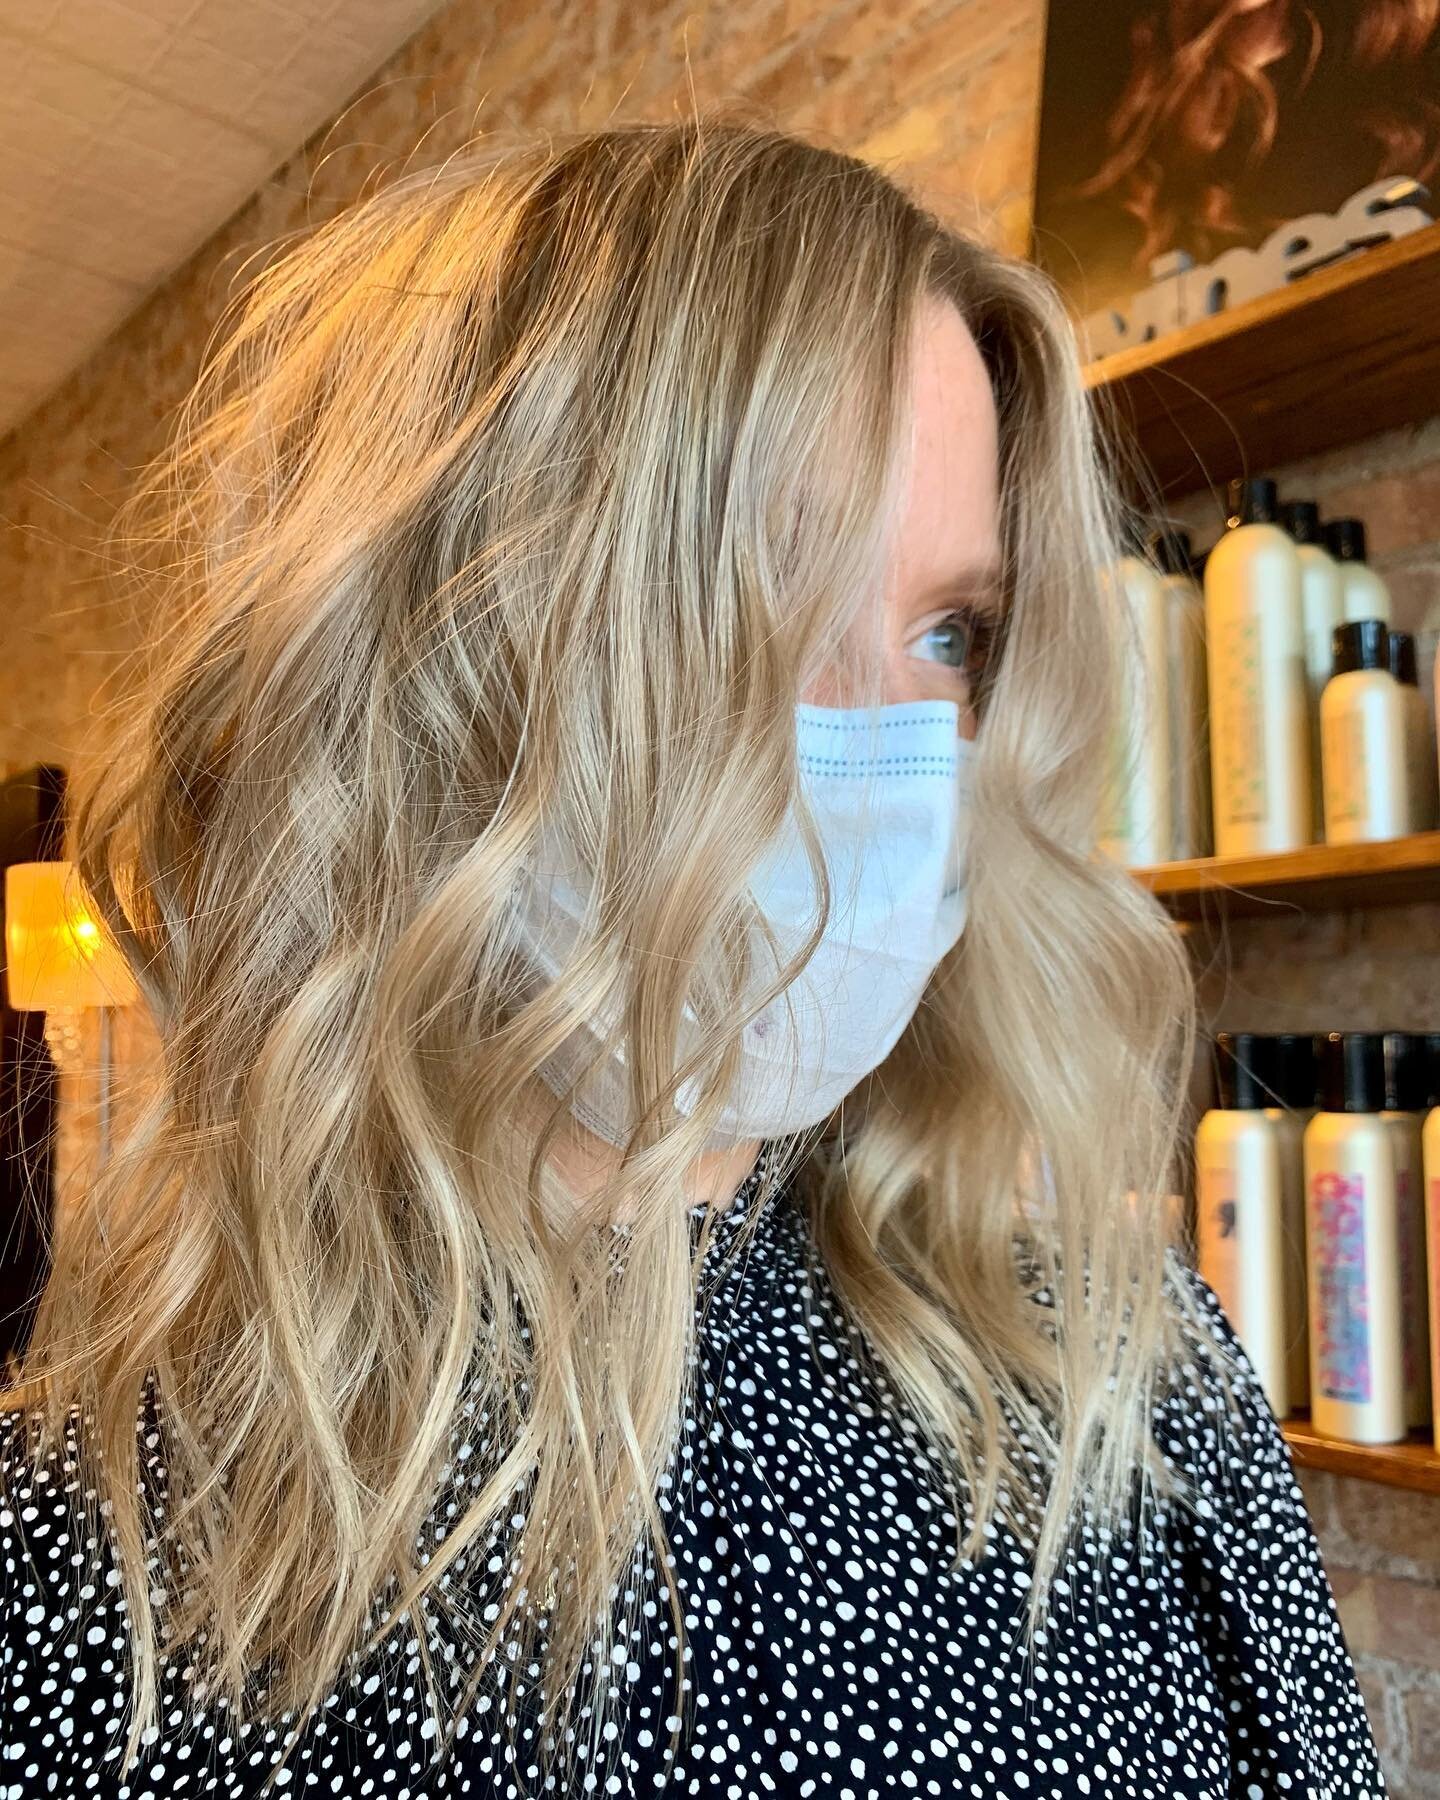 Make sure to snag an appointment with our junior stylist Katelyn ASAP 😘 she is the bomb💣 @_hairbykatelyn_ 
&bull;
&bull;
&bull;
&bull;
#mandcosalon #davinessalon #pmtslombard #wheatonsalon #wheatonillinois #napervillehairstylist #napervillemoms #gl